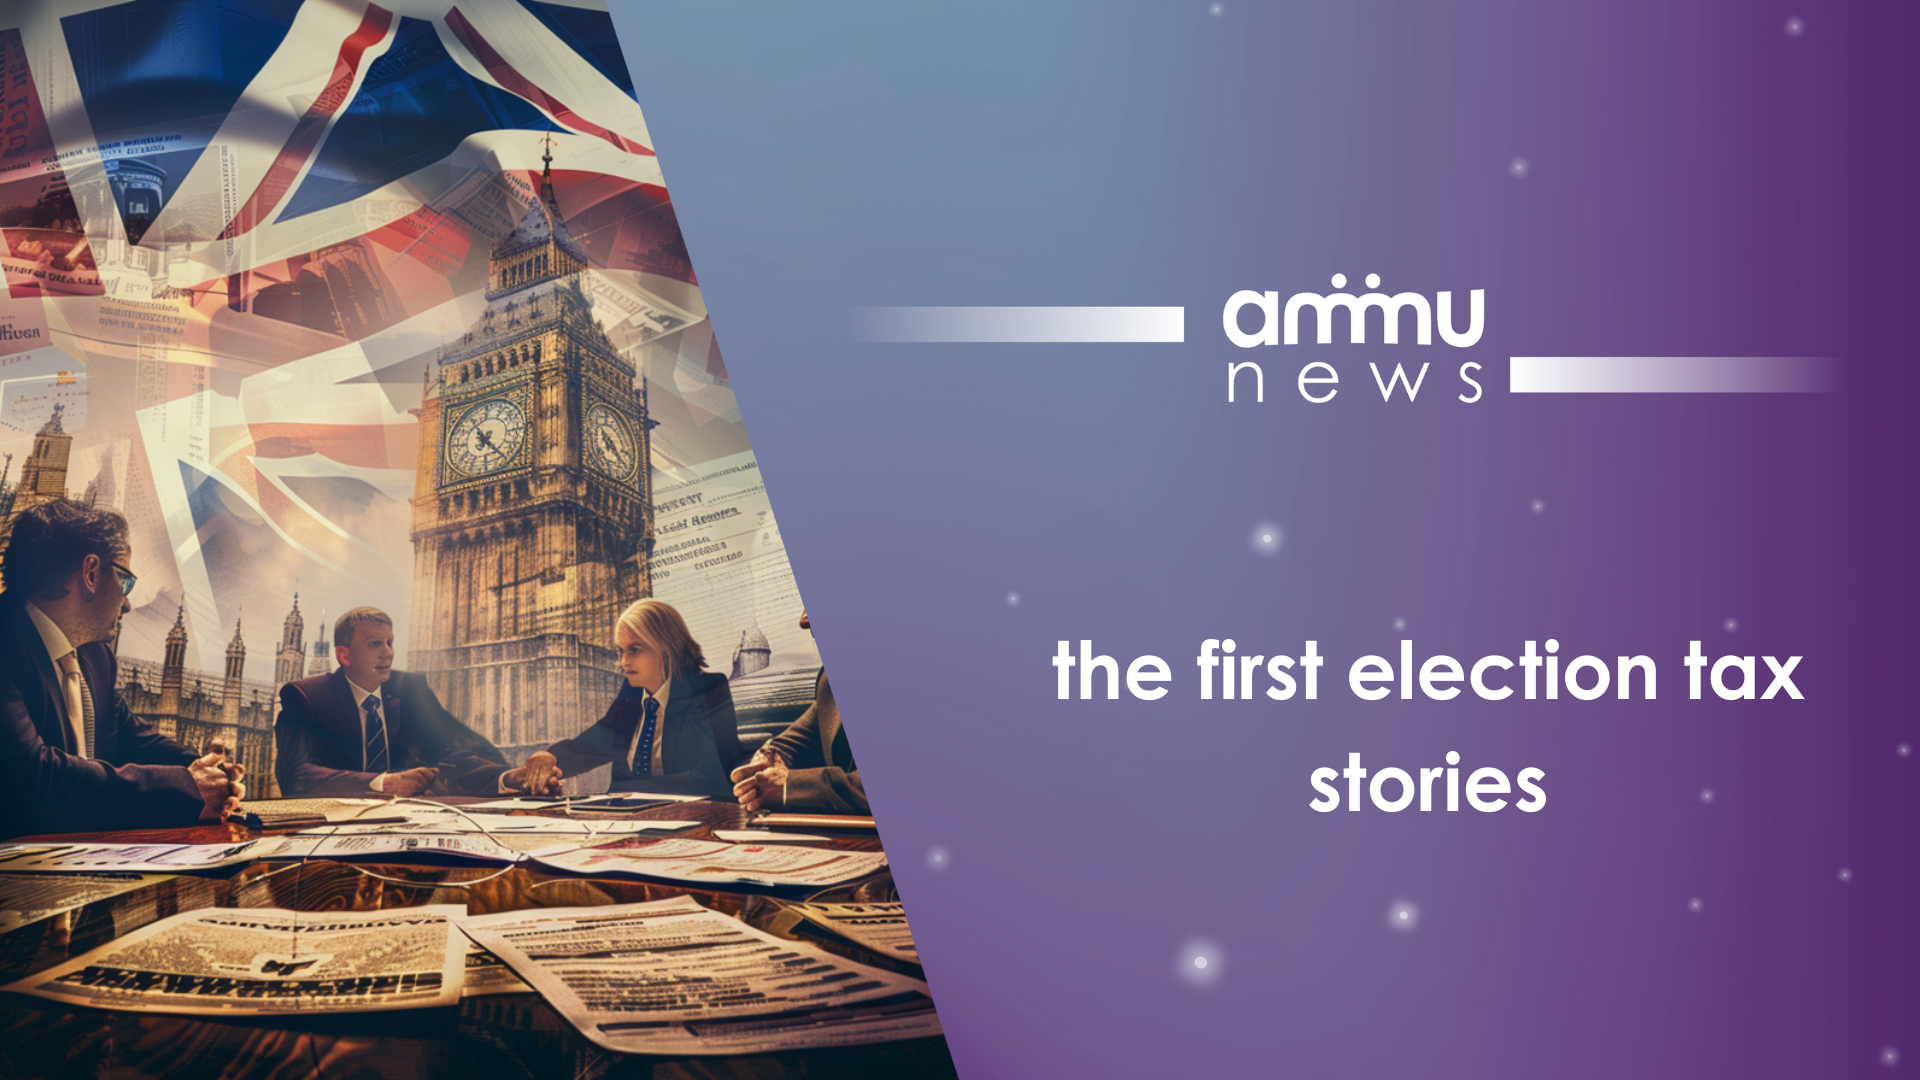 The first election tax stories